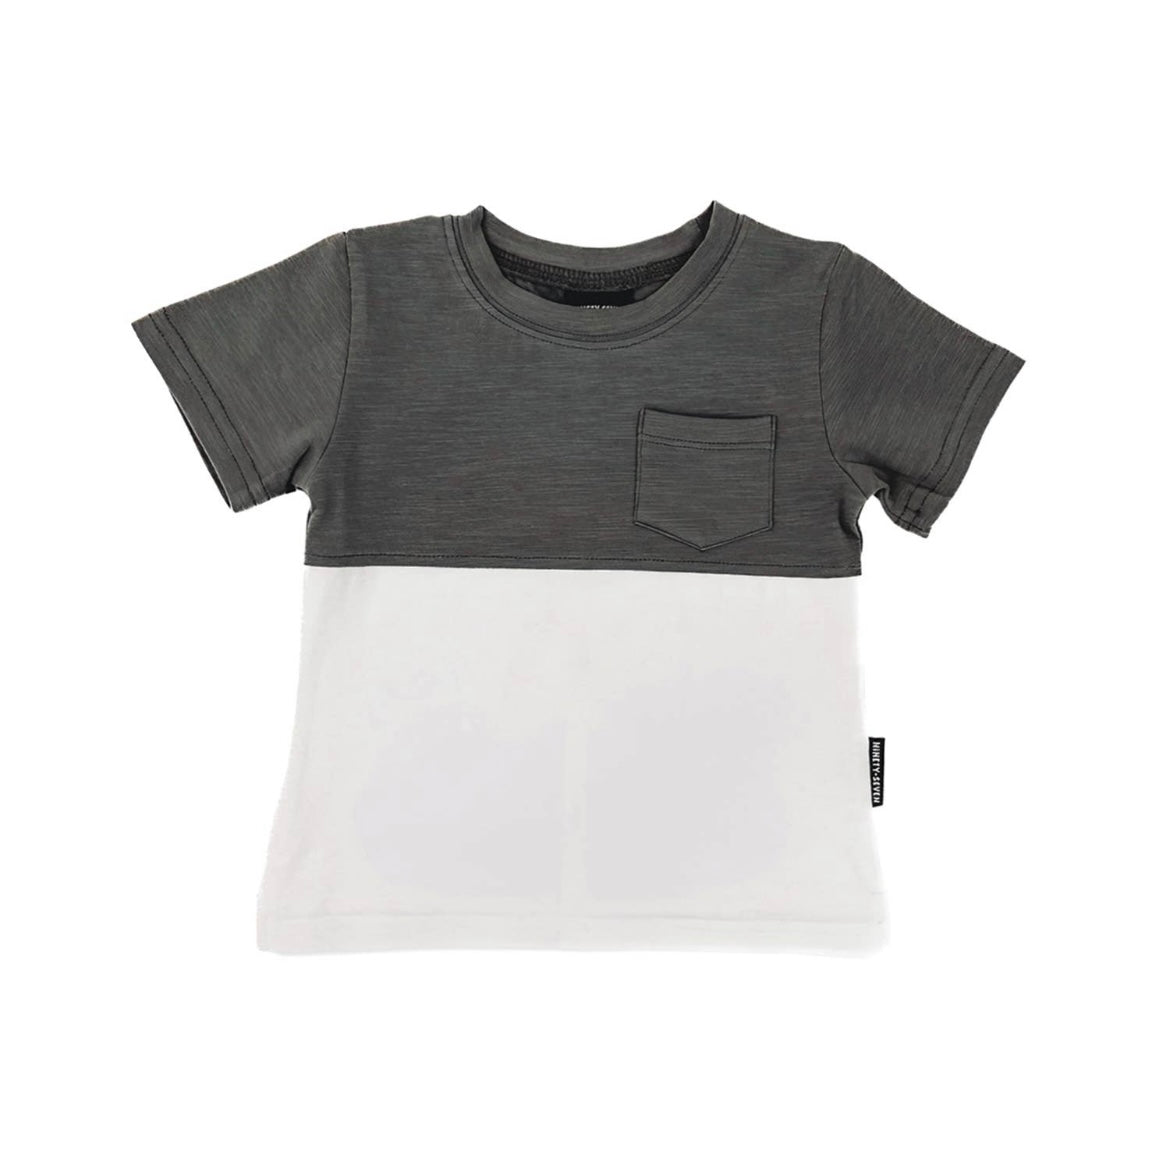 Front view of 97 Design Company Charcoal Pocket Tee